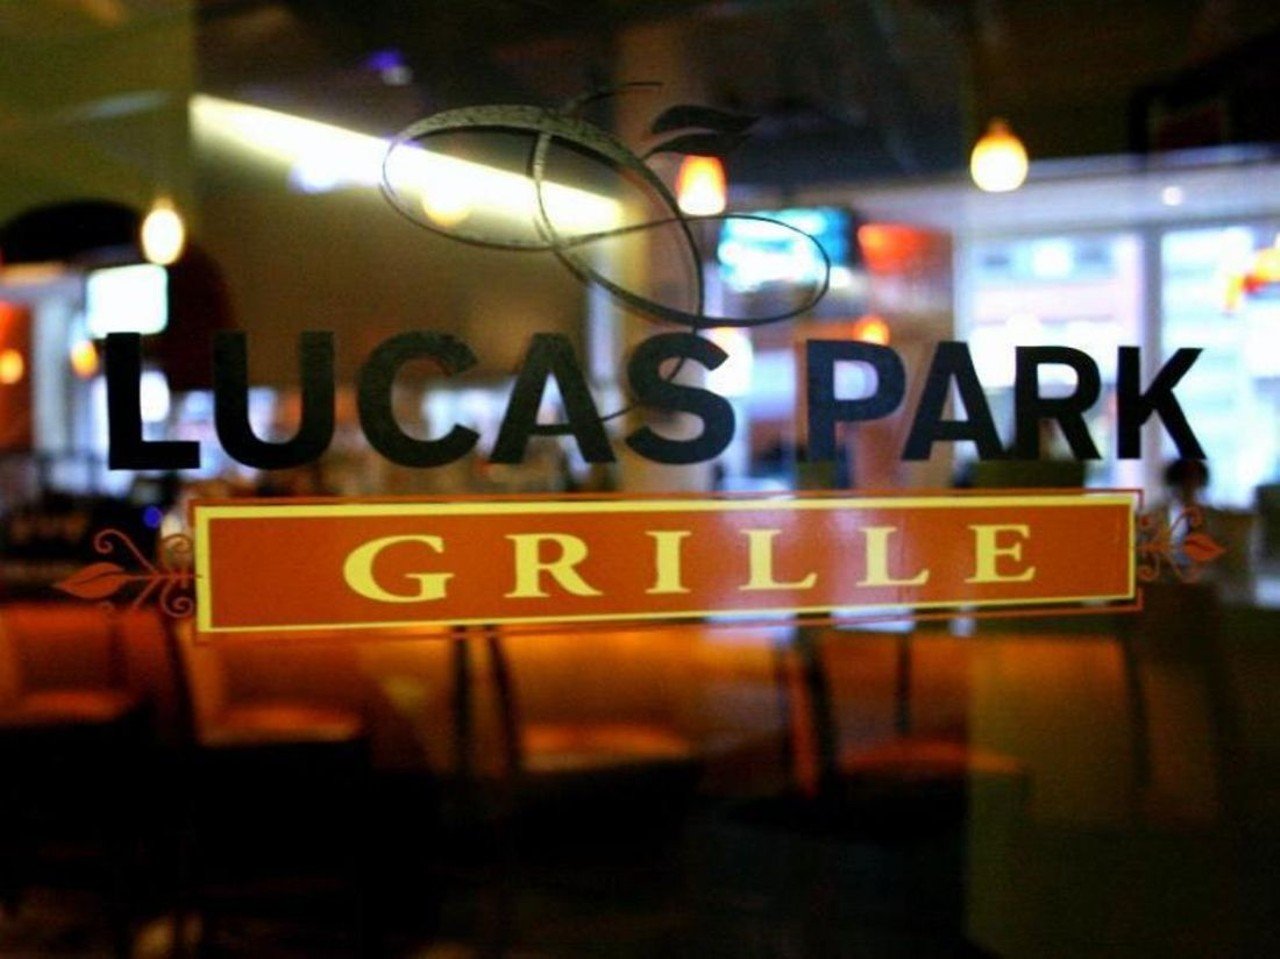 Lucas Park Grille
1234 Washington Ave 
St. Louis, MO 63103 
Lucas Park Grille was the first restaurant to call Washington Avenue home just after the 2004 loft district revitalization and is still going strong more than a decade later. A large and elegant industrial space filled with stone, copper and brick and several warm fireplaces, the bar is often bursting at the seams with the club crowd. You'll find an electric atmosphere and some of the best people-watching in town. RFT File Photo